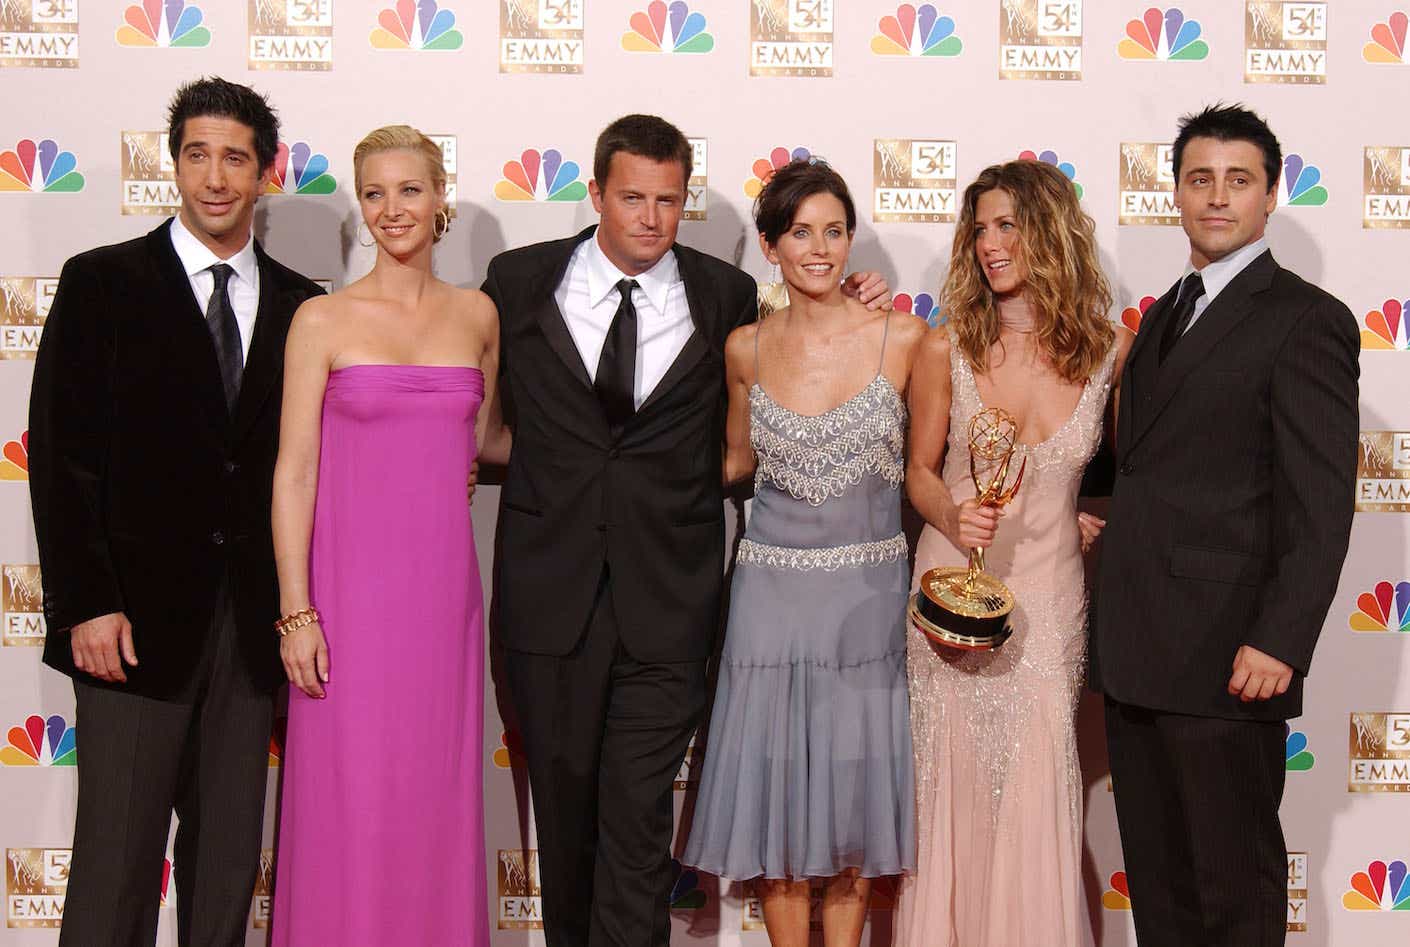 Actors David Schwimmer, Lisa Kudrow, Matthew Perry, Courteney Cox Arquette, Jennifer Aniston and Matt LeBlanc pose backstage during the 54th Annual Primetime Emmy Awards at the Shrine Auditorium on September 22, 2002 in Los Angeles, 